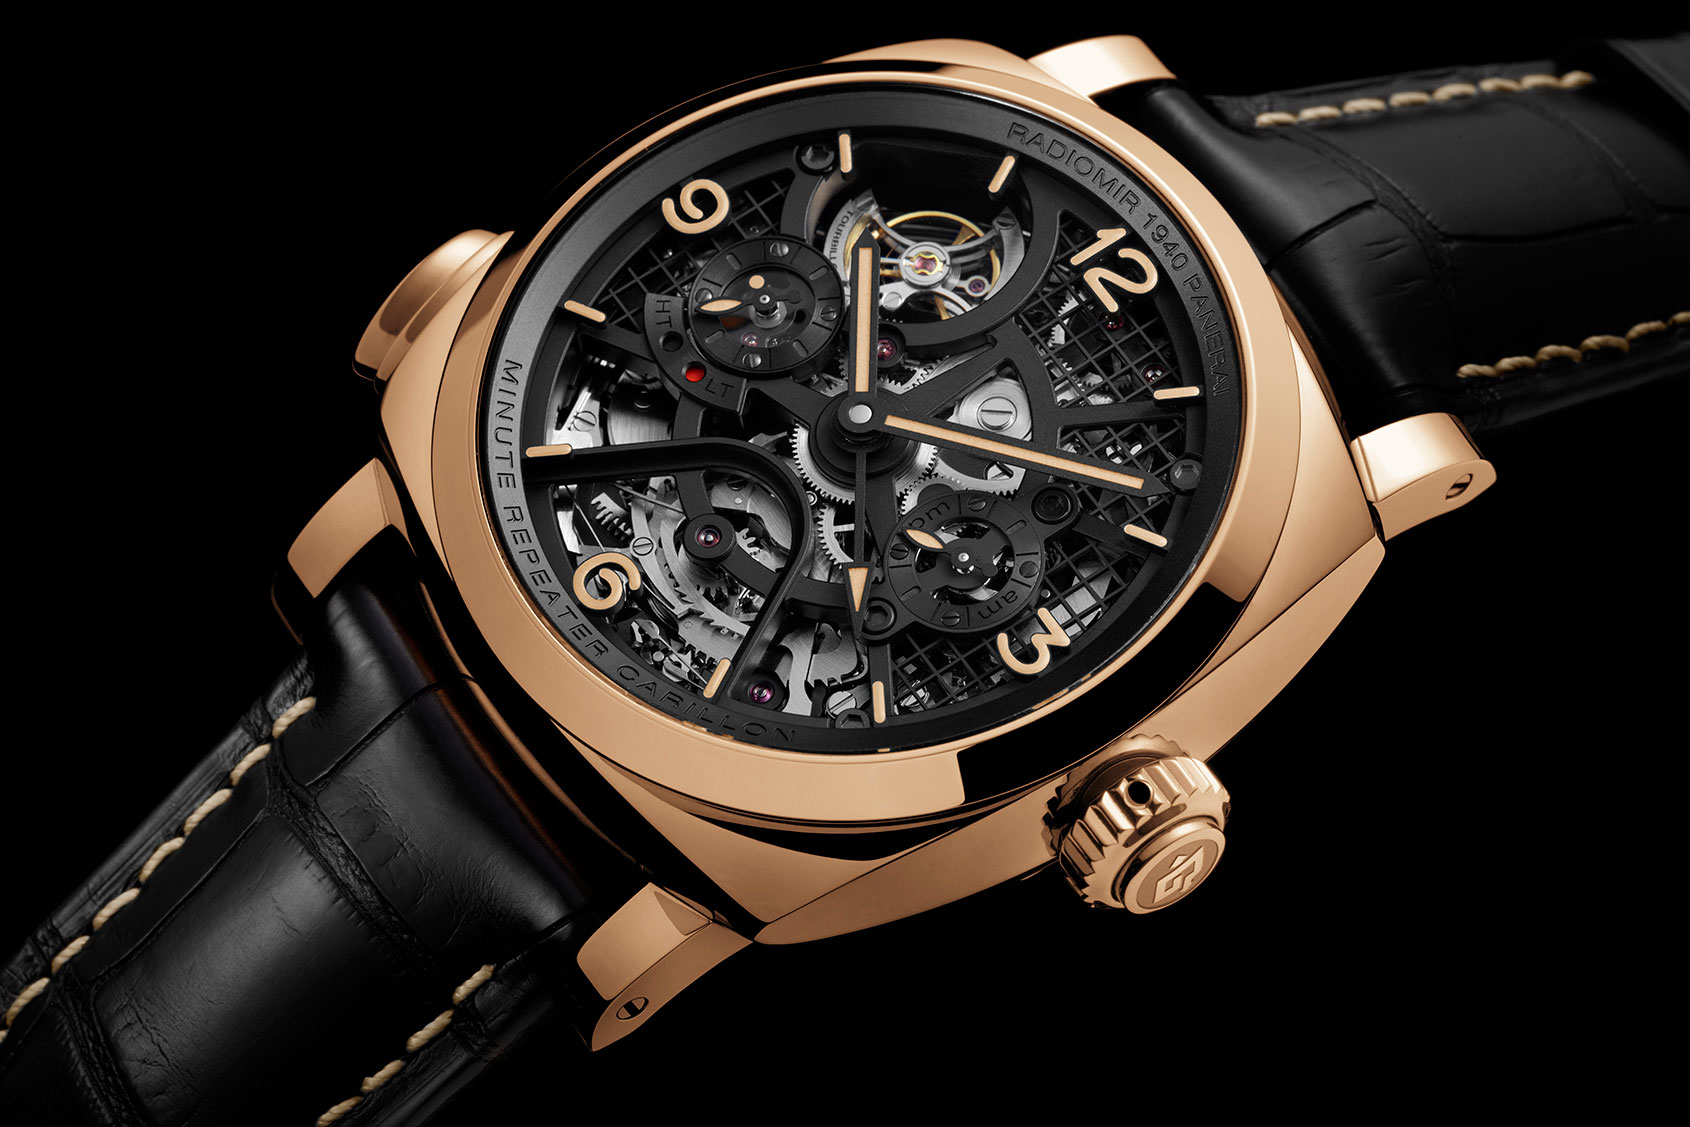 INTRODUCING: For whom the bell tolls, the replica Panerai Radiomir 1940 Minute Repeater Carillon